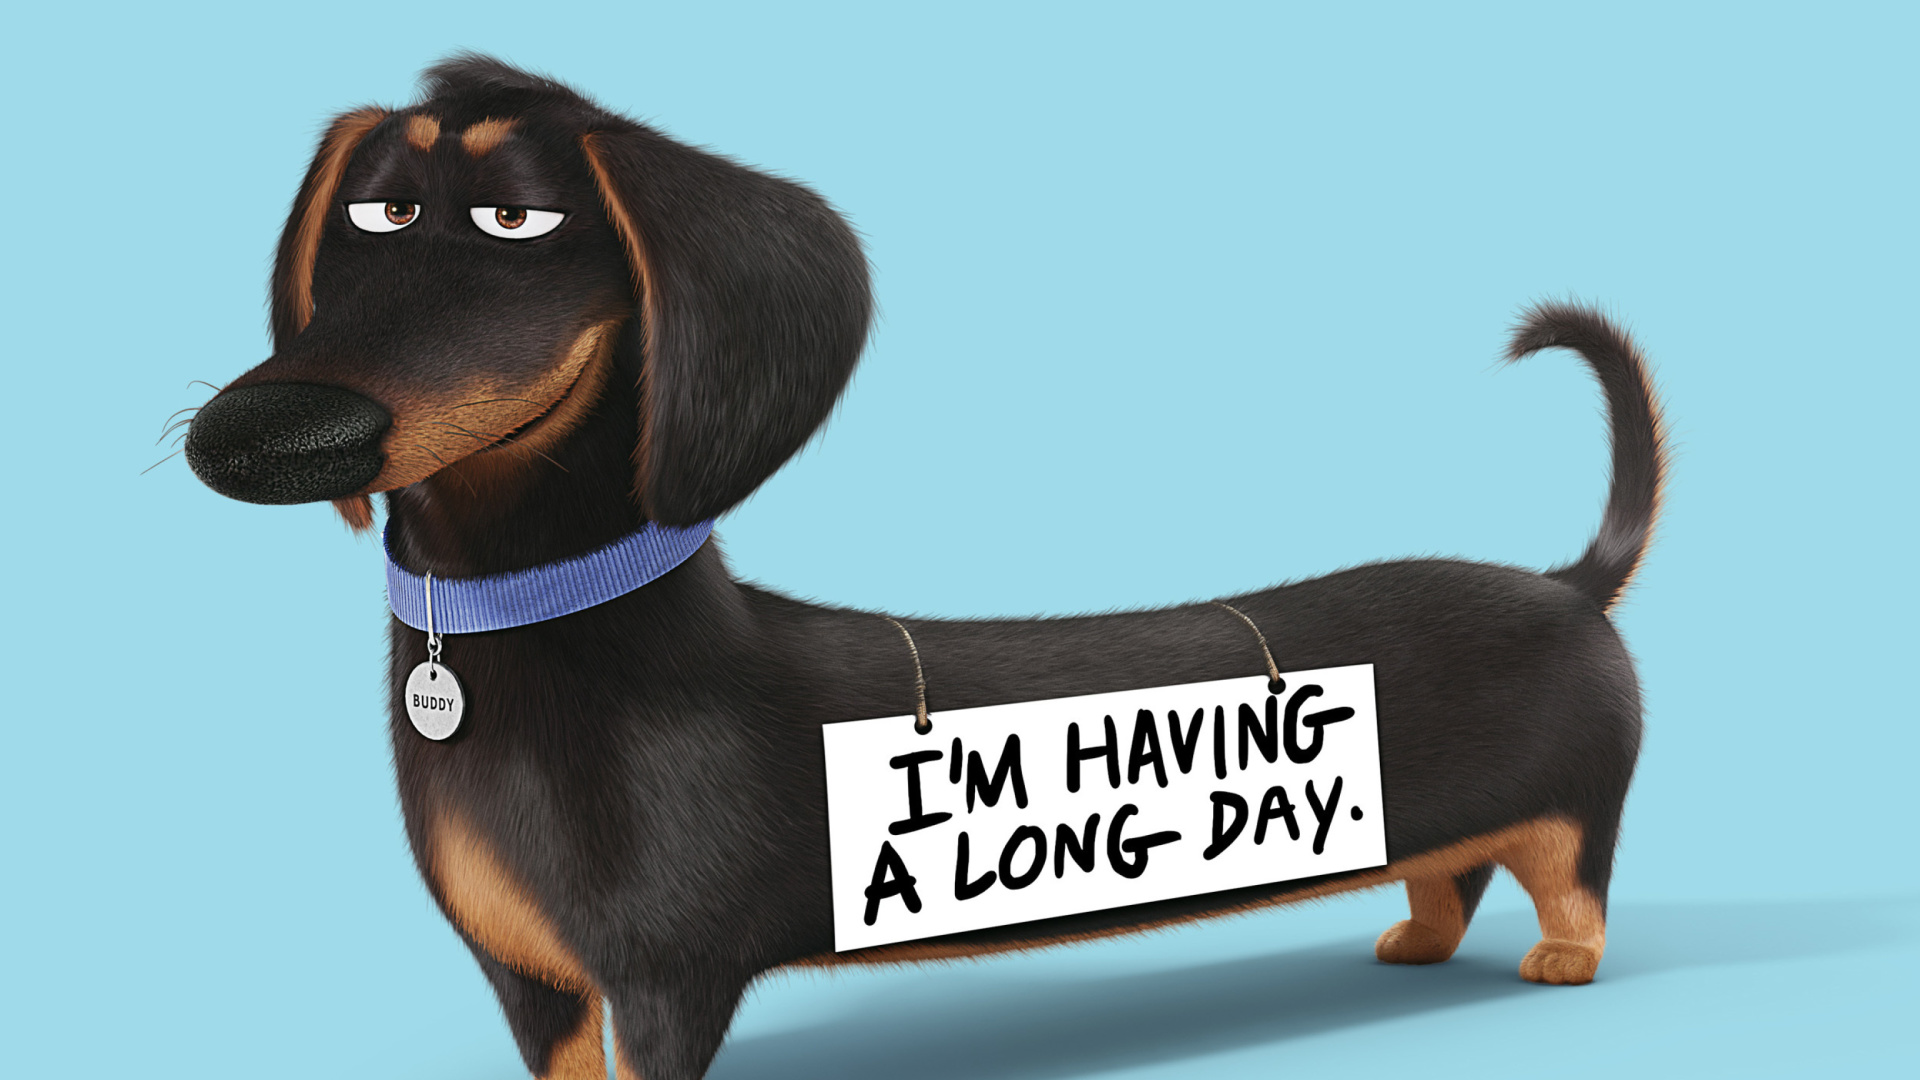 Buddy from The Secret Life of Pets wallpaper 1920x1080